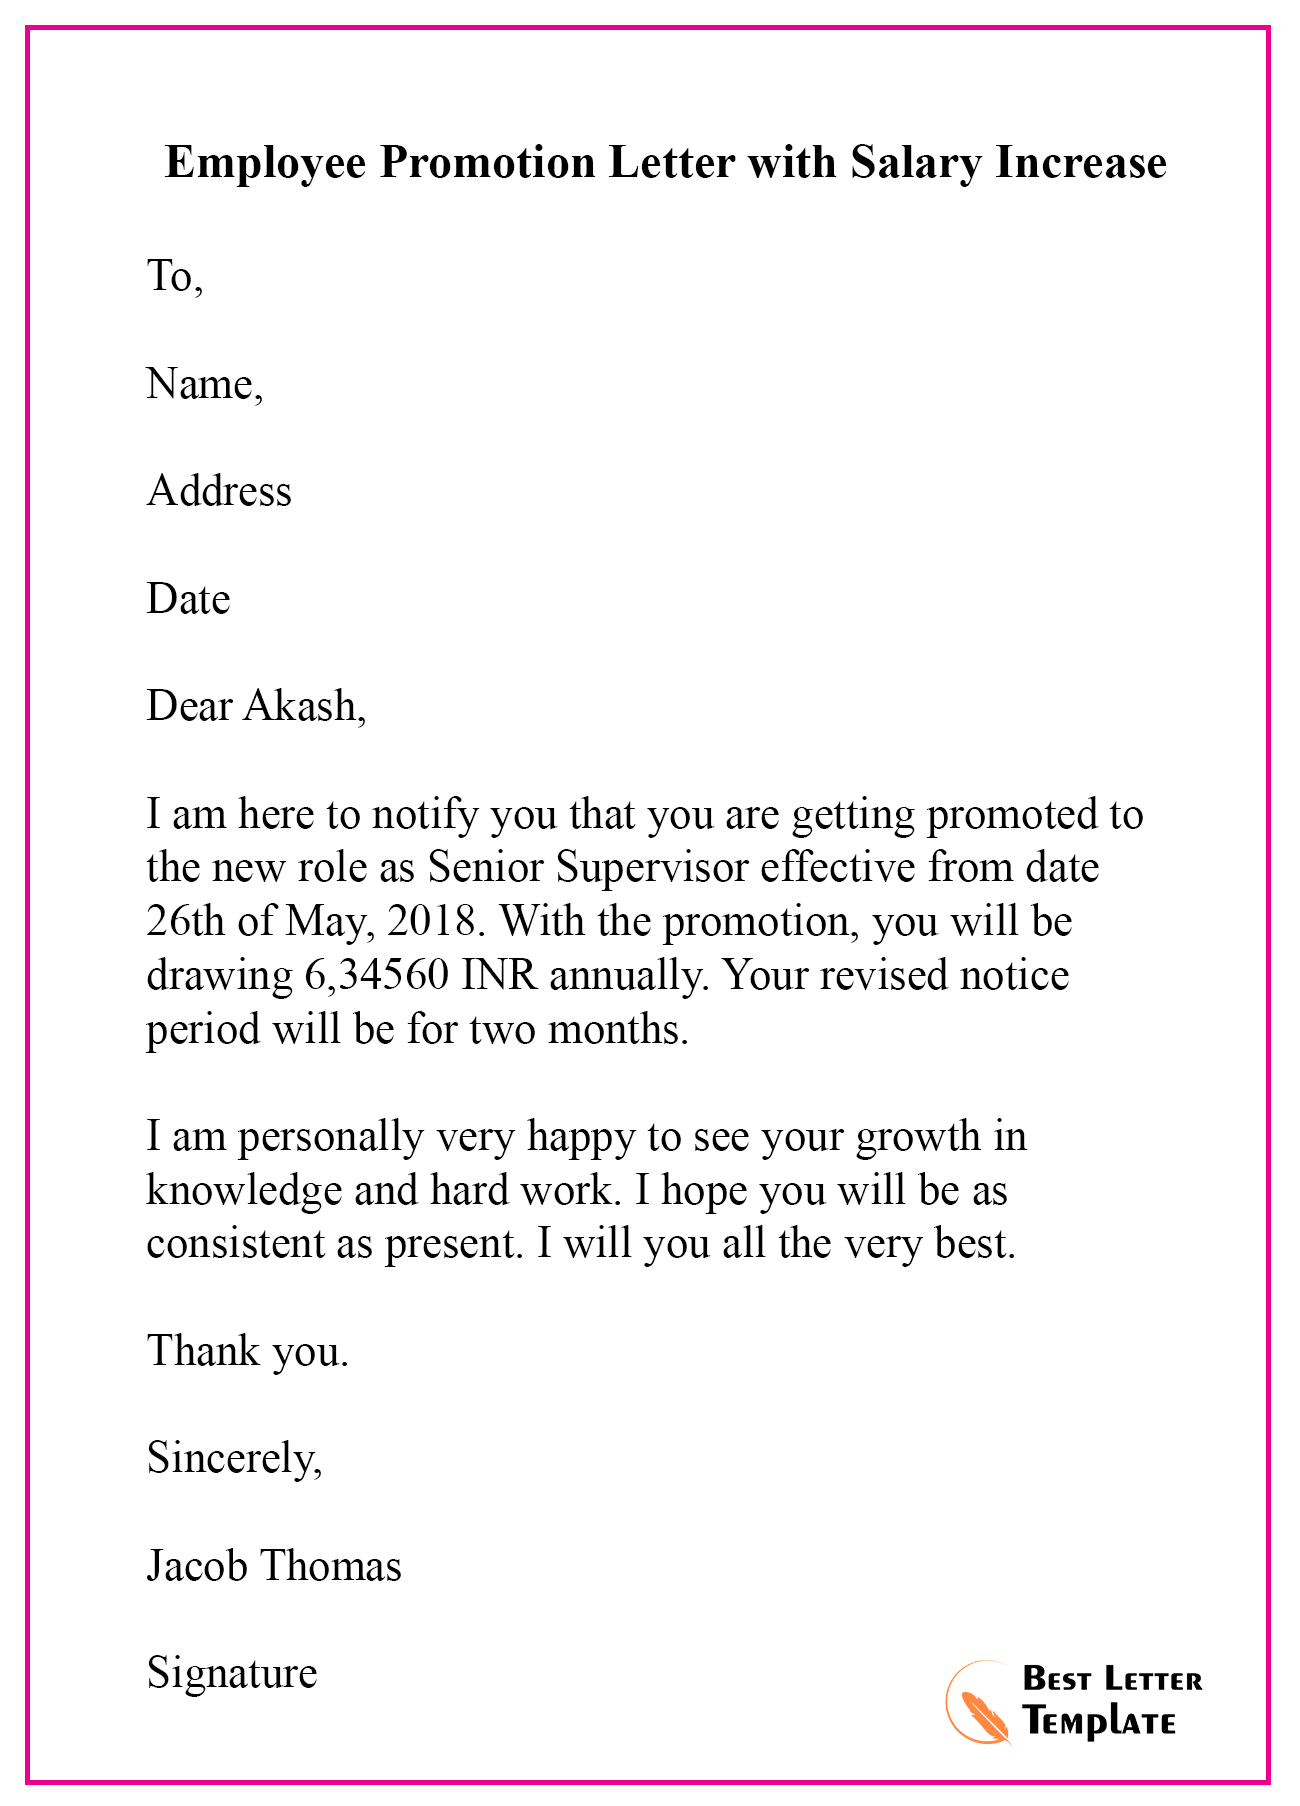 Salary Increase Letter Template from bestlettertemplate.com